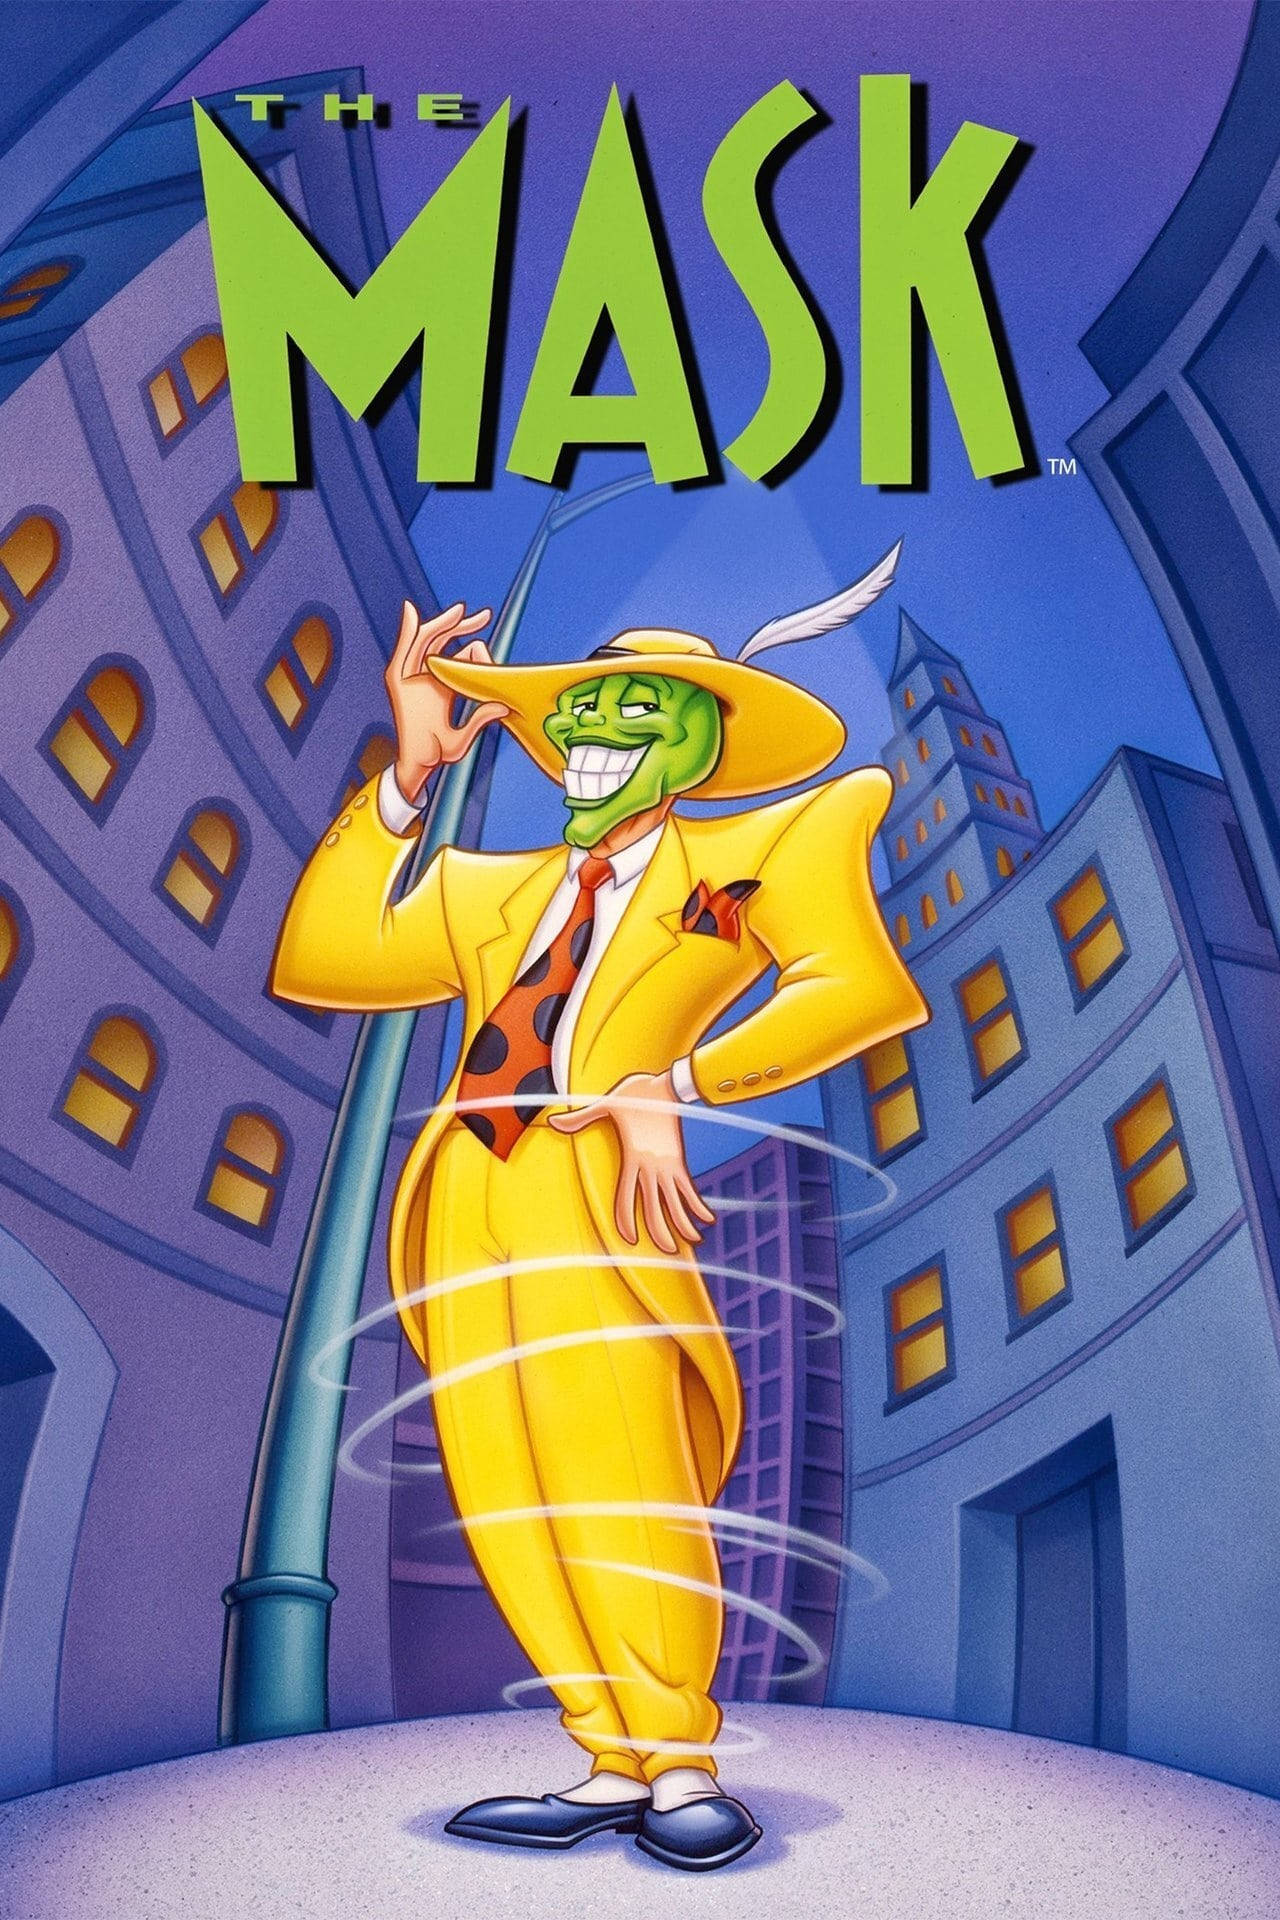 The Mask Grinning Poster Background